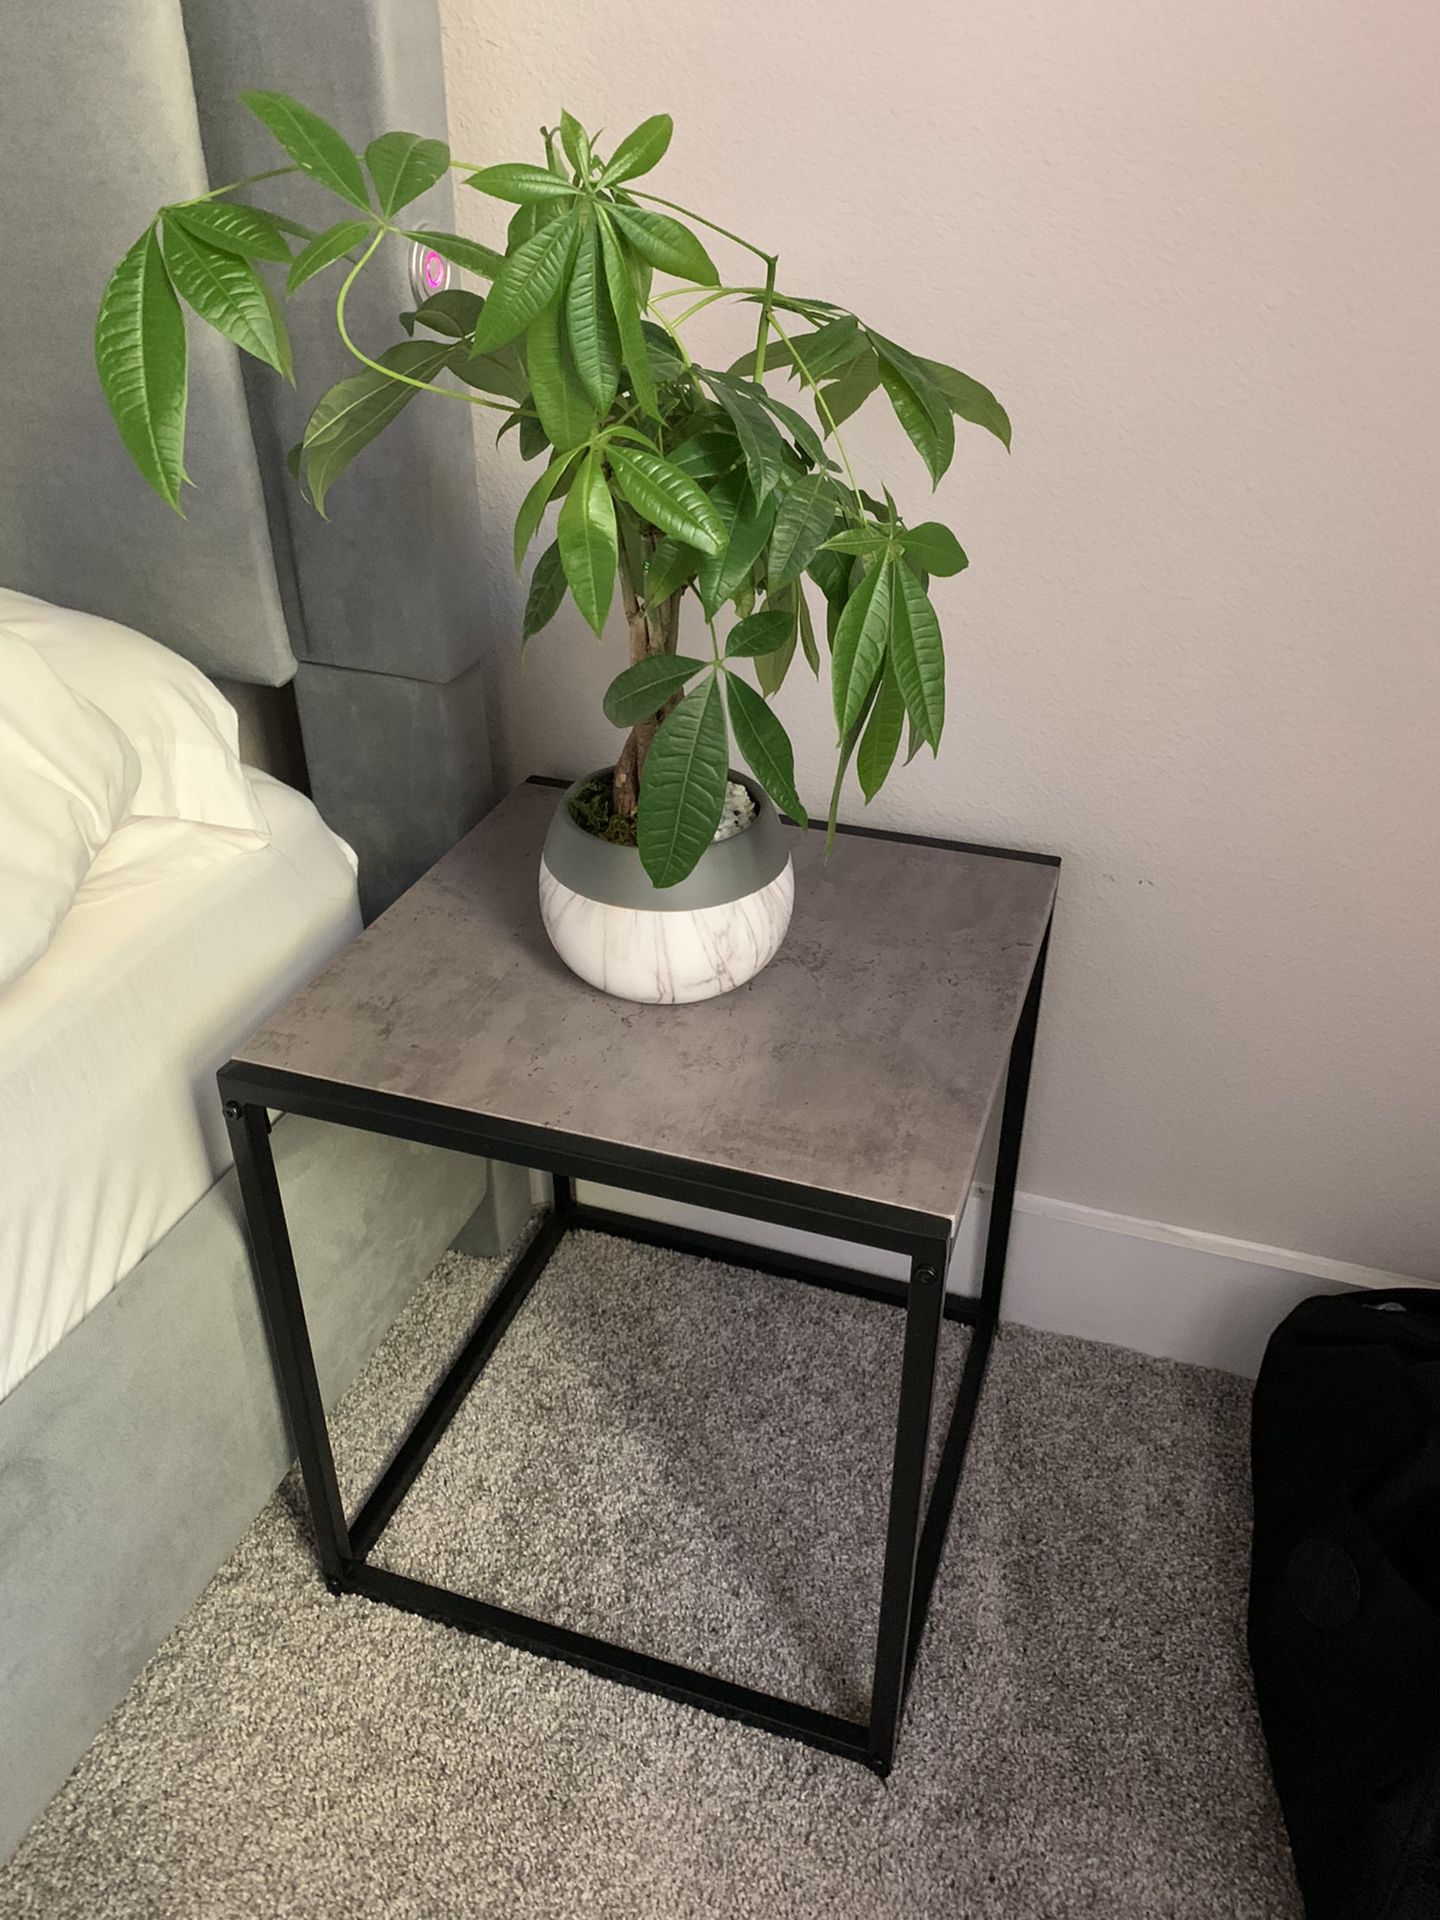 Pair of Bedside / End table - concrete color - LIKE NEW